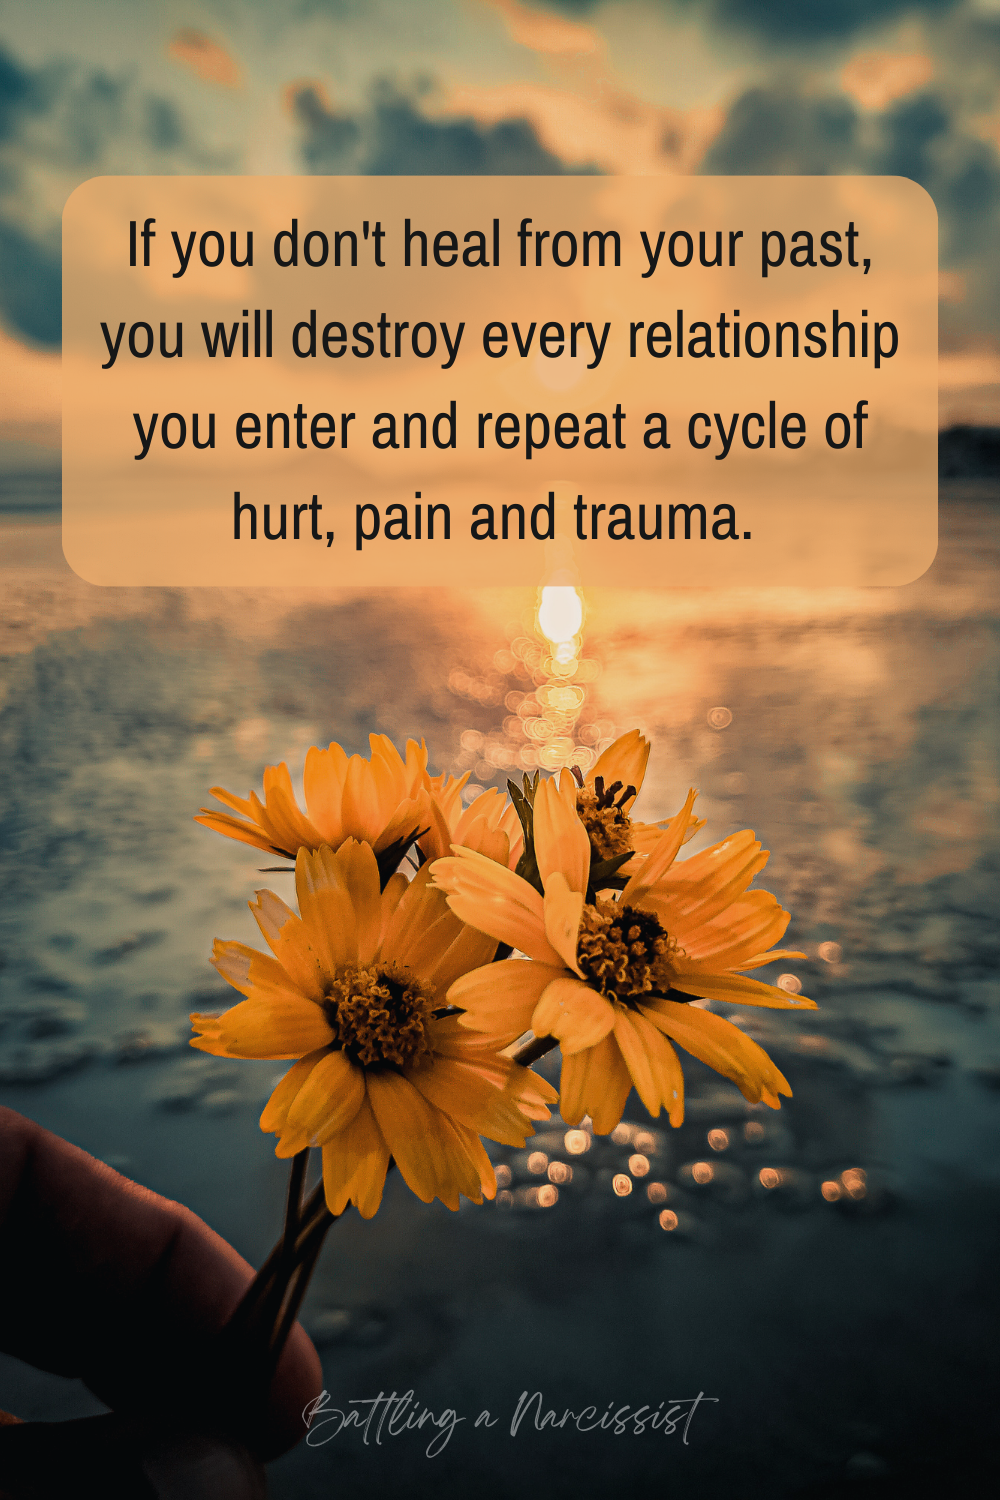 If you don't heal from your past, you will destroy every relationship you enter and repeat a cycle of hurt, pain and trauma. 